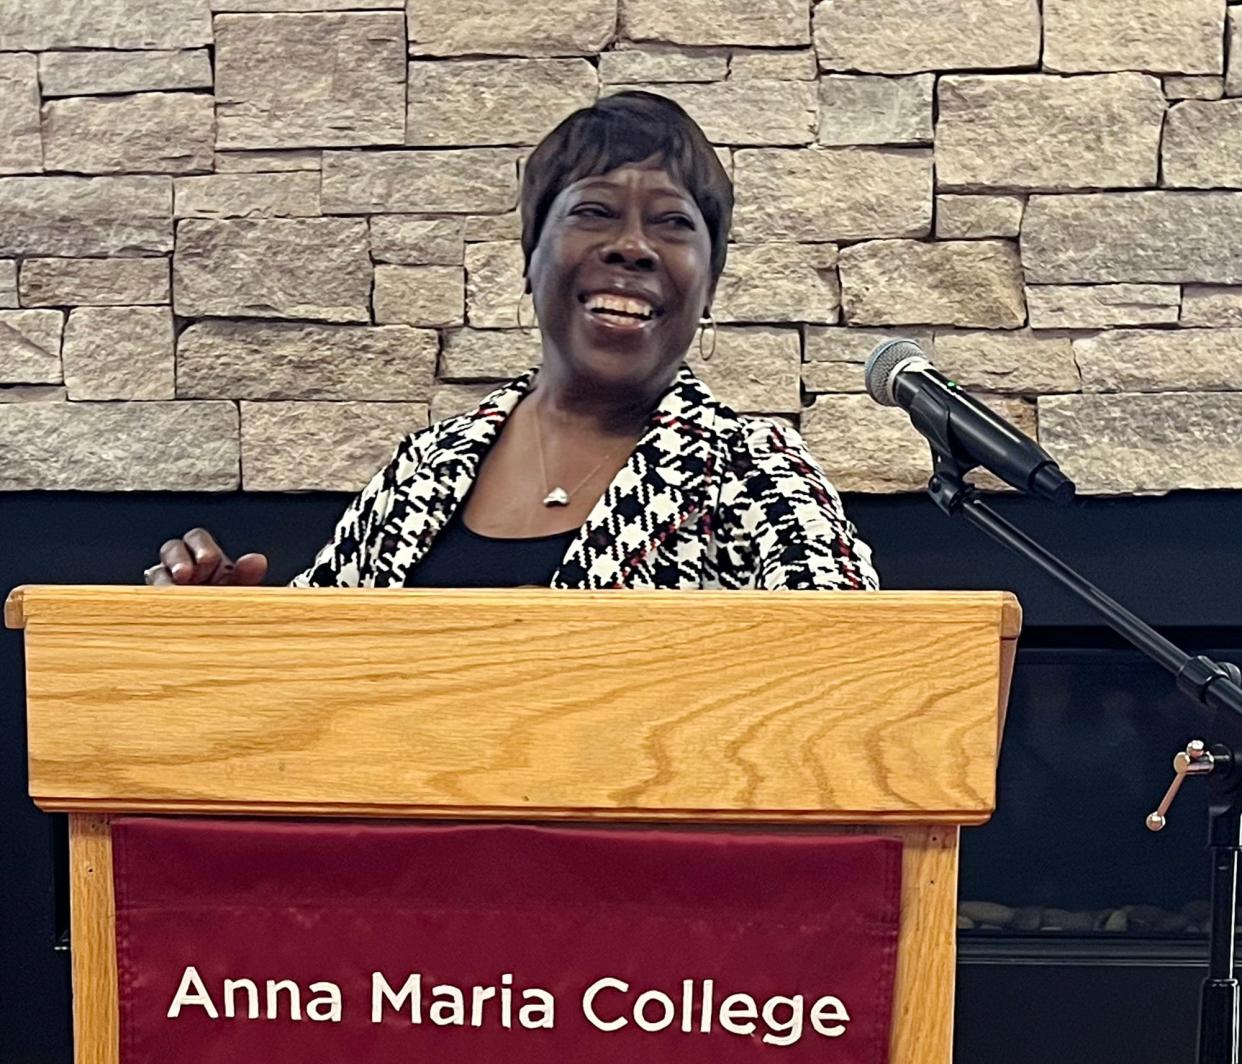 Bettie Mae Fikes, member of the Freedom Singers and a student civil rights activist, speaks at Anna Maria College Tuesday.